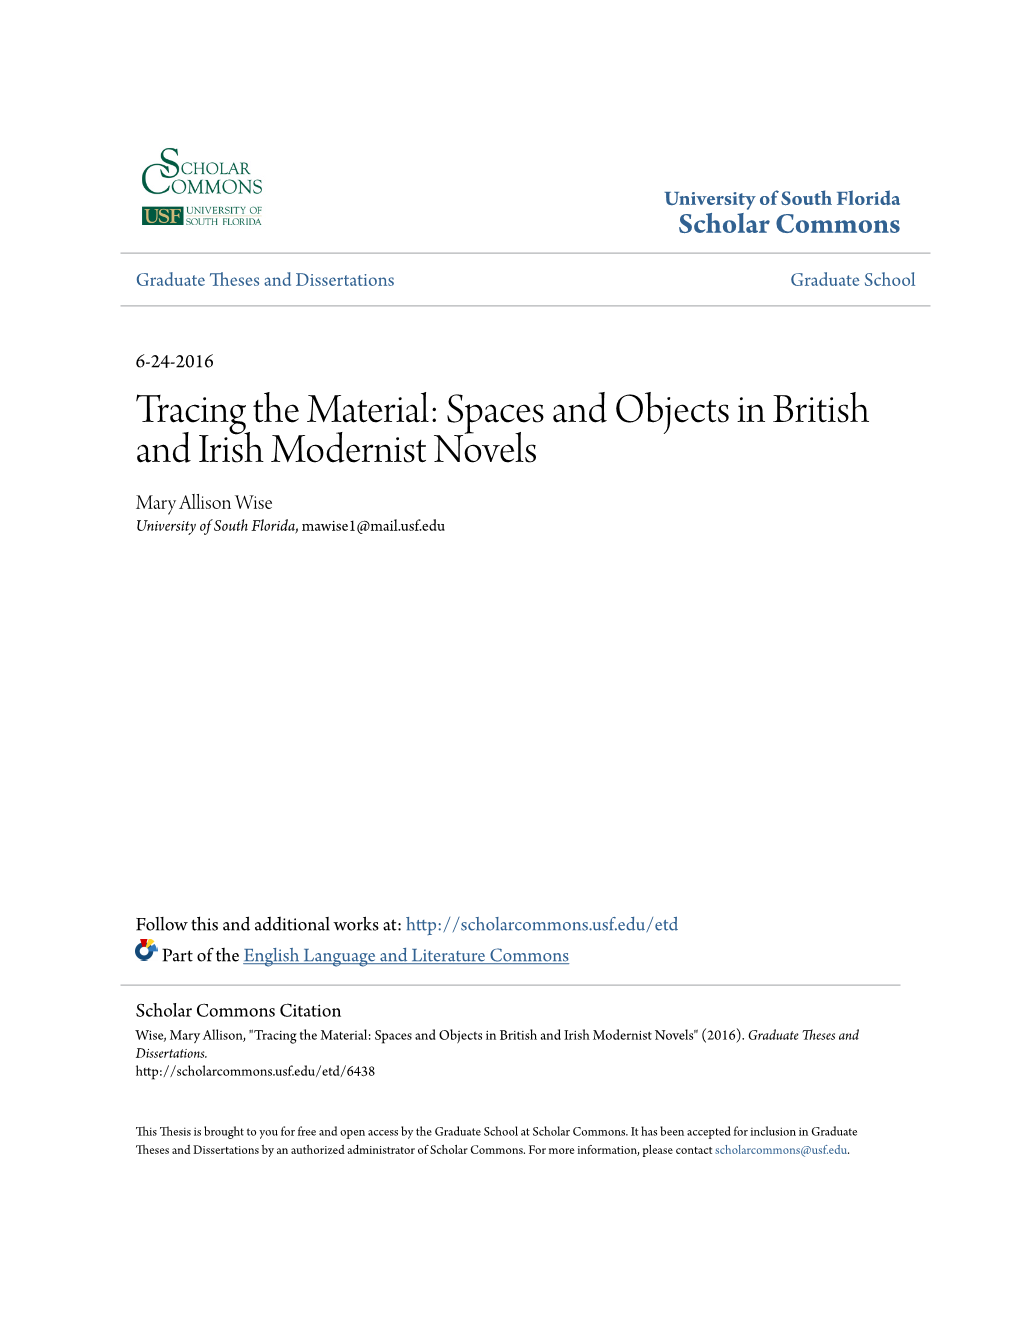 Spaces and Objects in British and Irish Modernist Novels Mary Allison Wise University of South Florida, Mawise1@Mail.Usf.Edu